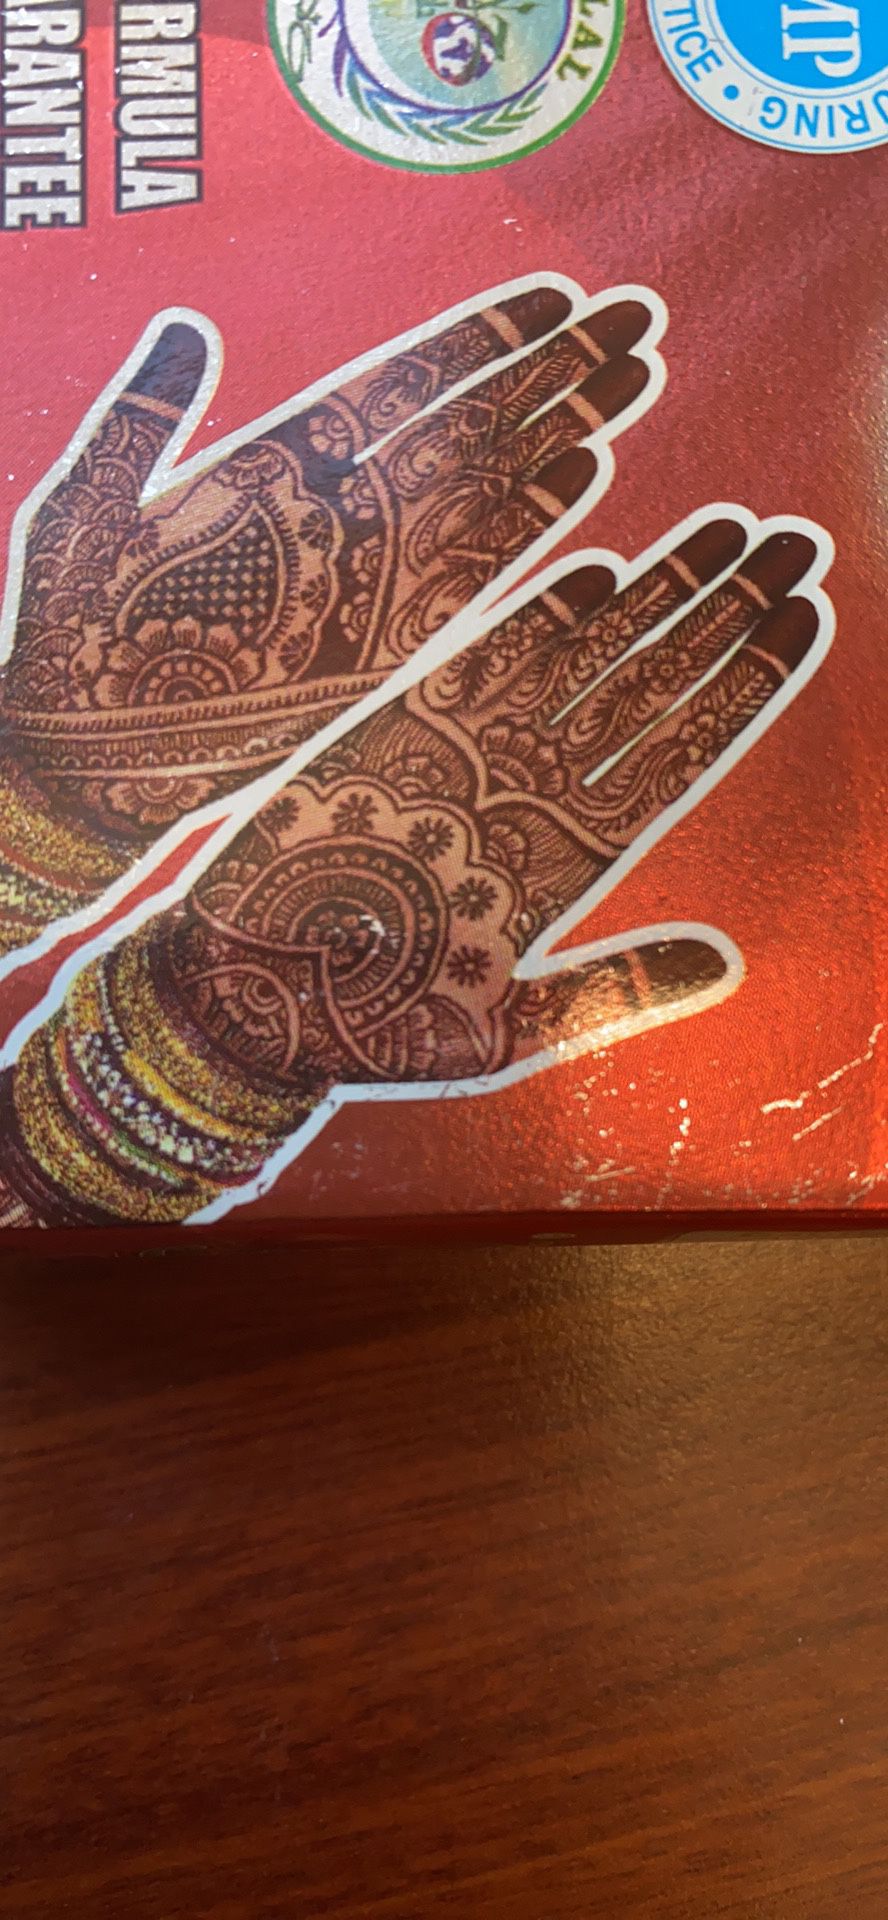 Red Henna Mehndi. Good For Nails And For Henna Designs On Hands. $4 Each. 